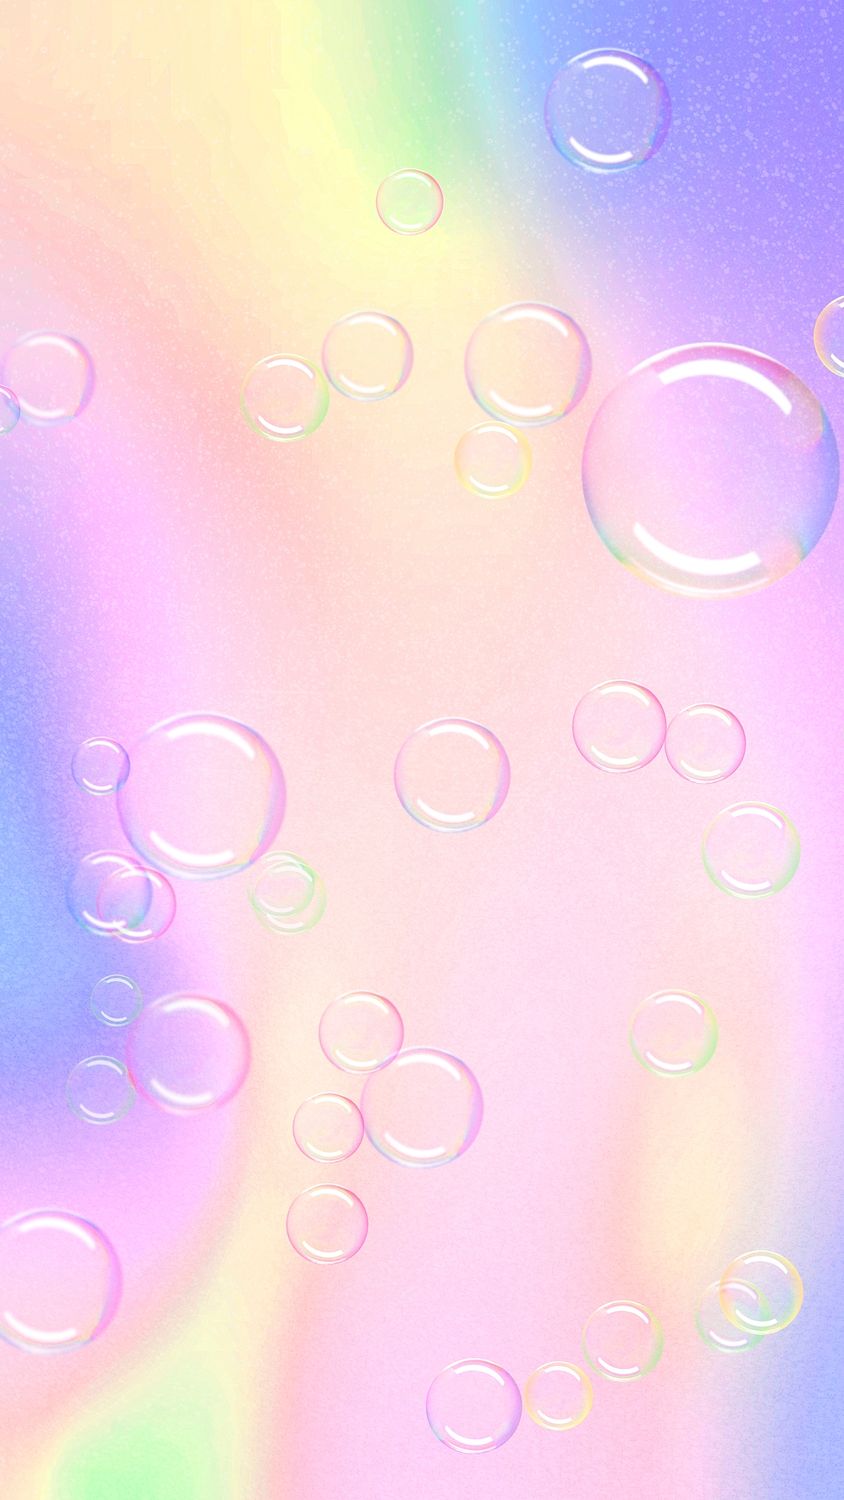 Bubble effect holographic pattern background | Free Photo - rawpixel